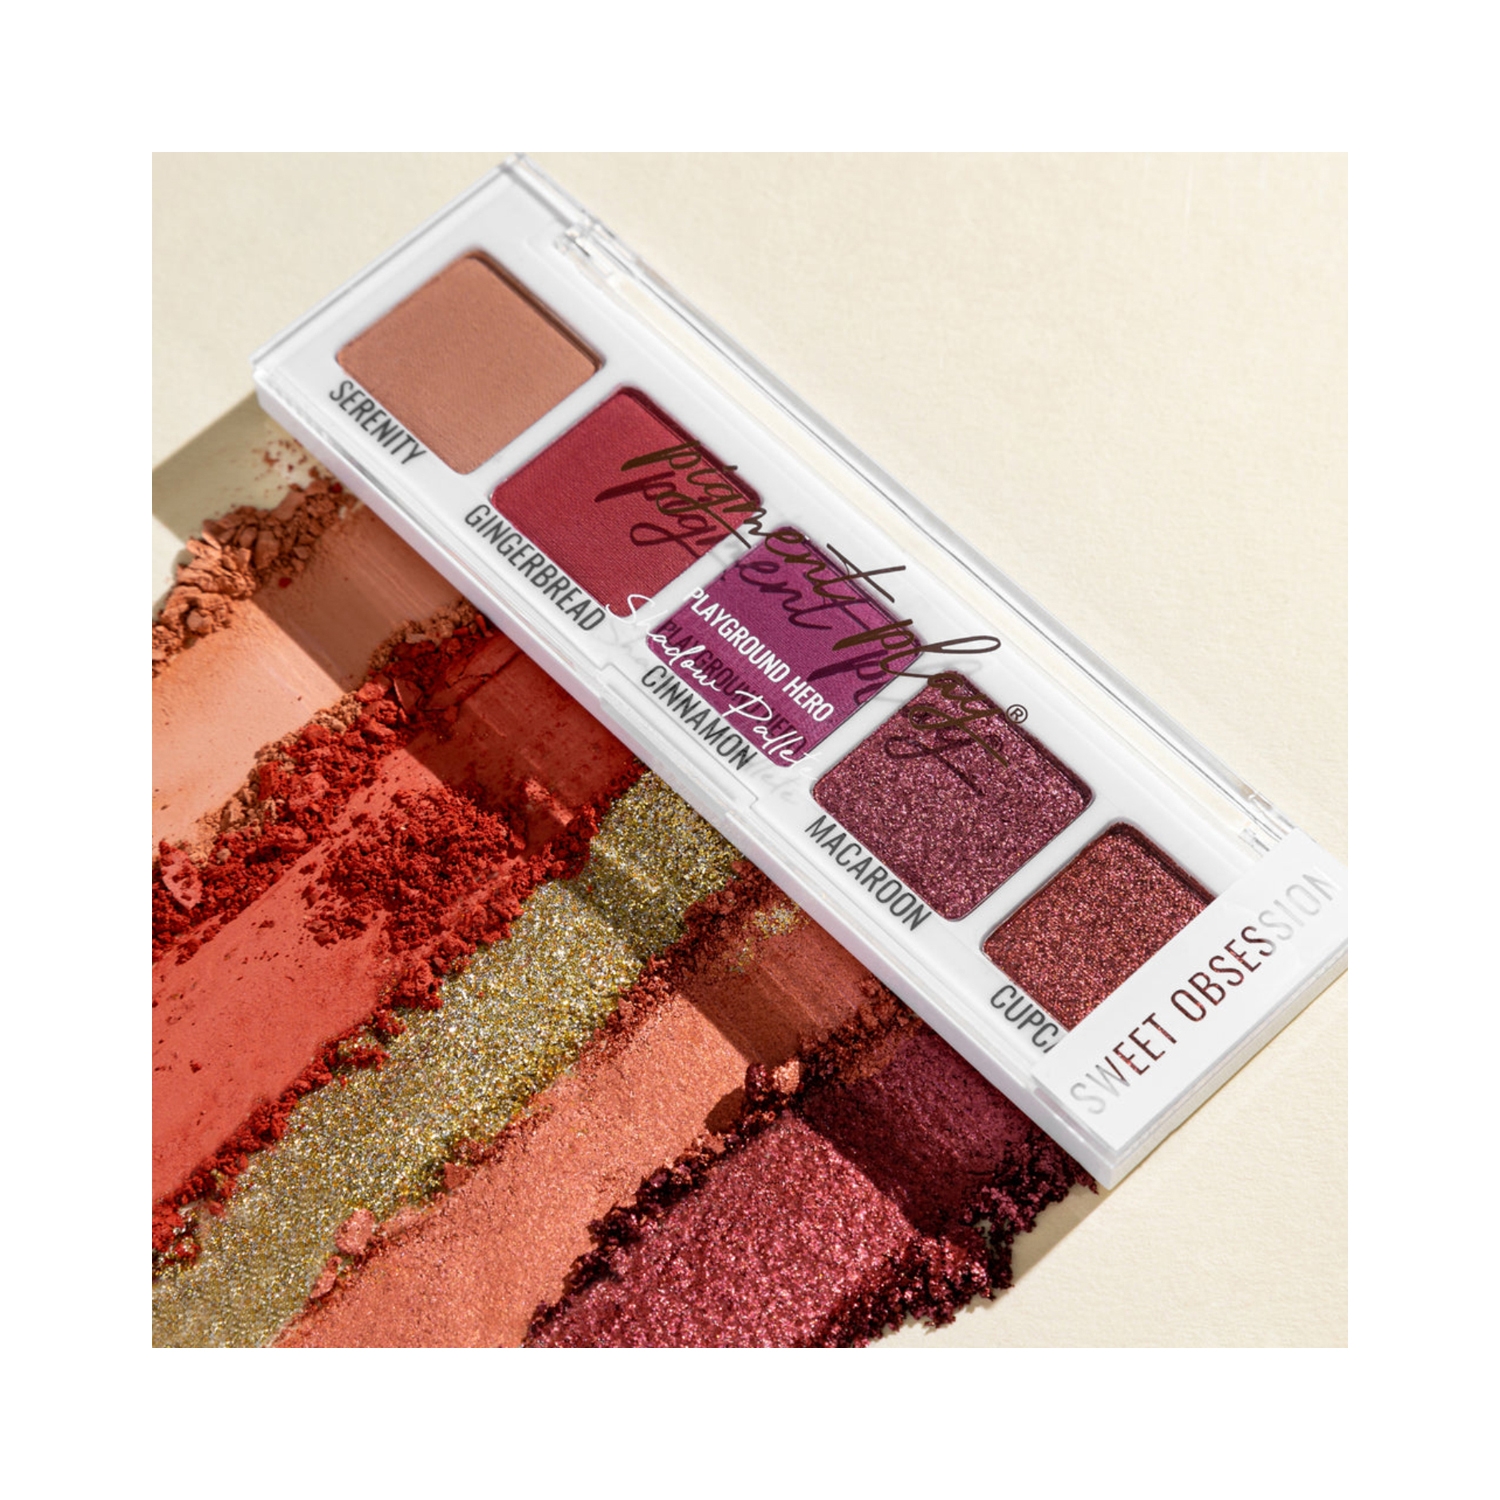 Pigment Play | Pigment Play Sugar & Spice Shadow Palette - Sweet Obsession (4.5g)